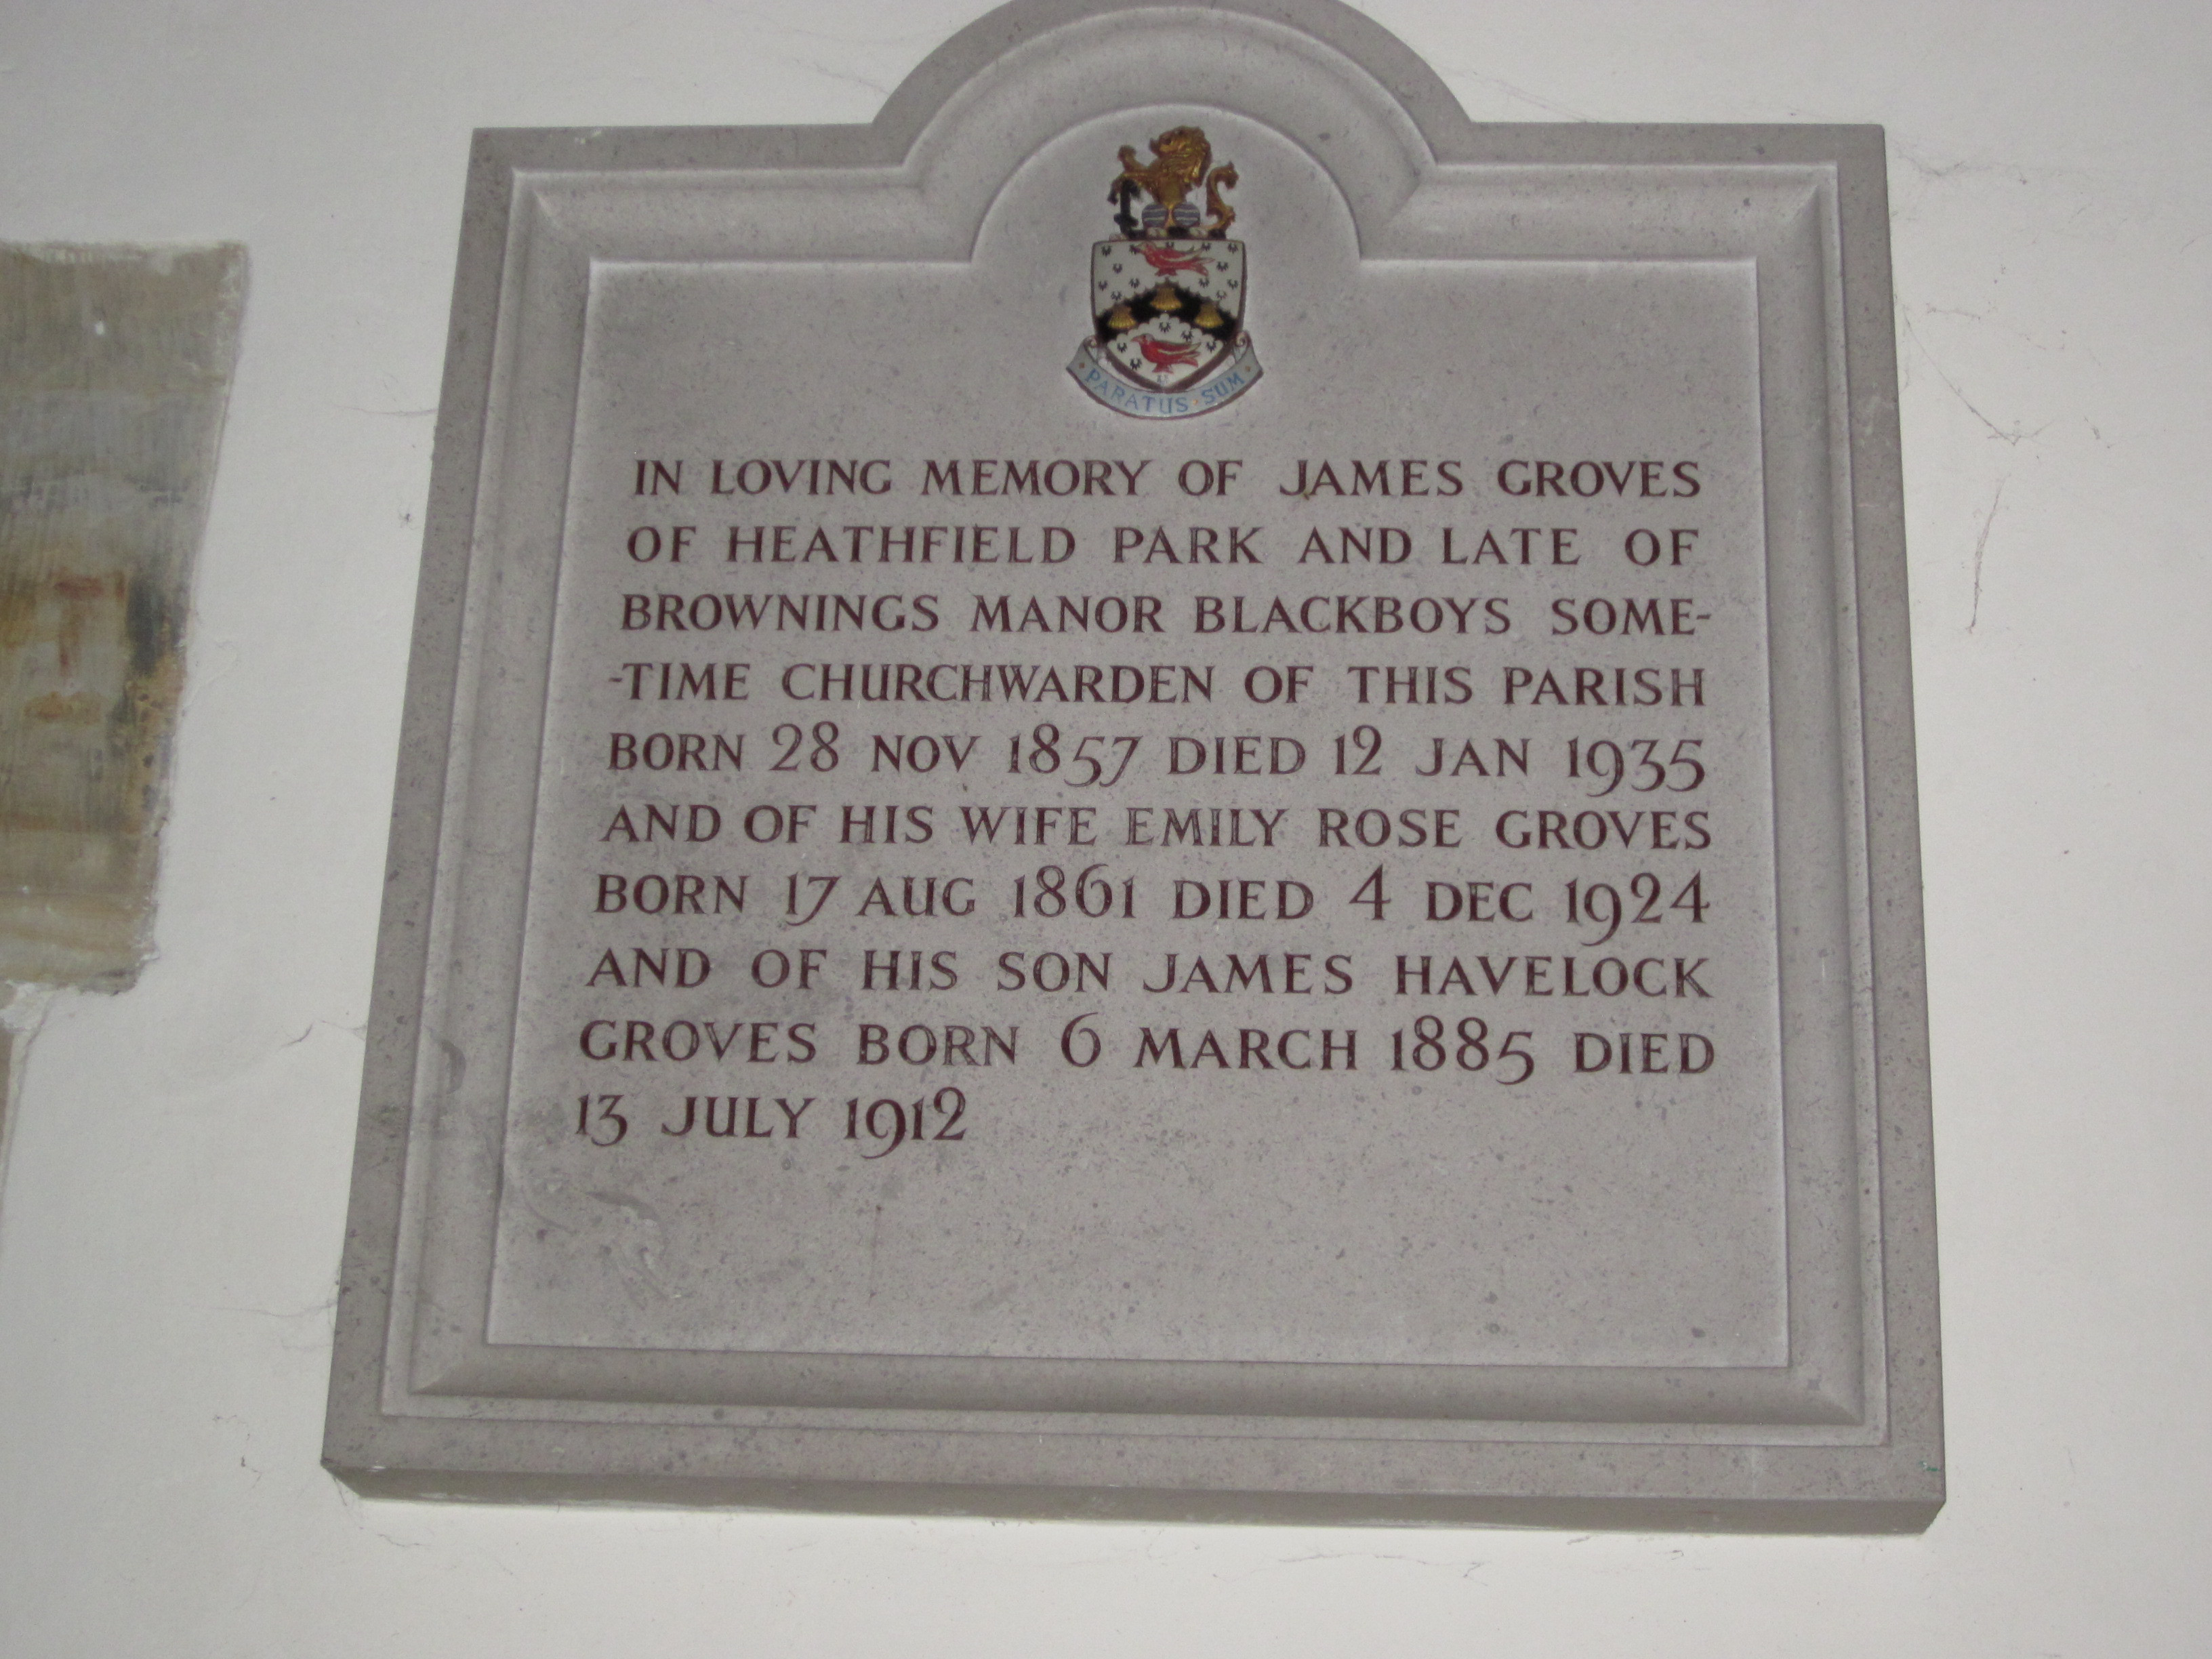 "In loving memory of James Groves of Heathfield Park and late of Brownings Manor Blackboys sometime Churchwarden of this parish. Born 28 Nov 1857 Died 12 Jan 1935 and of his wife Emily Rose Groves born 17 Aug 1861 Died 4 Dec 1924 and of his son James Havelock Groves born 6 March 1885 Died 15th July 1912."